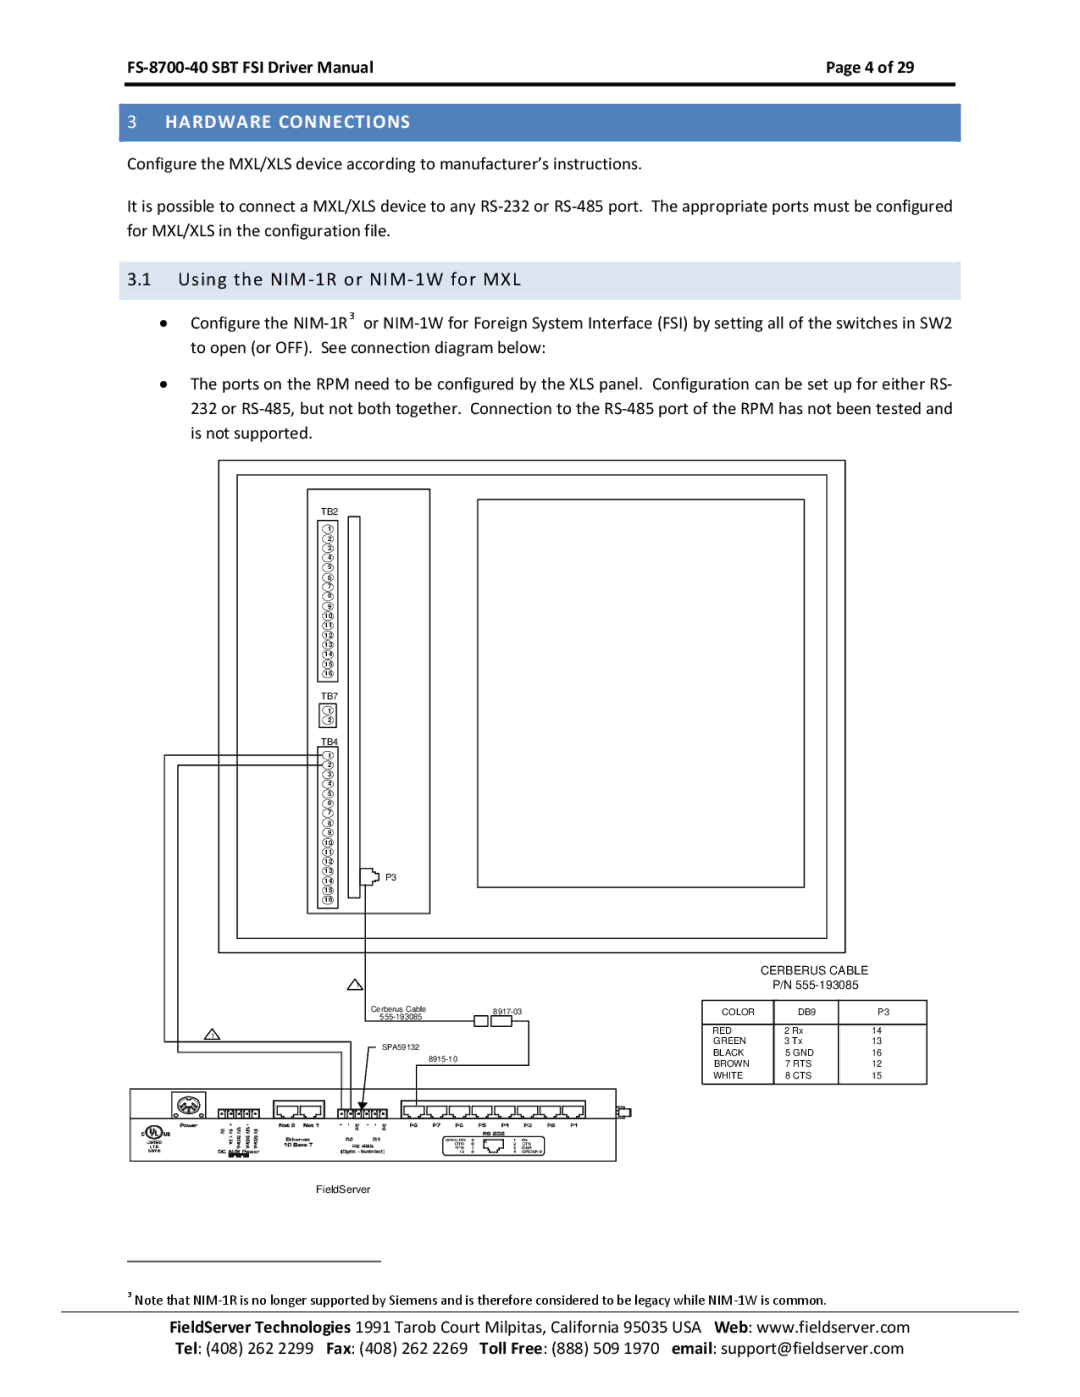 FieldServer FS-8700-40 instruction manual Hardware Connections, Using the NIM-1R or NIM-1W for MXL 